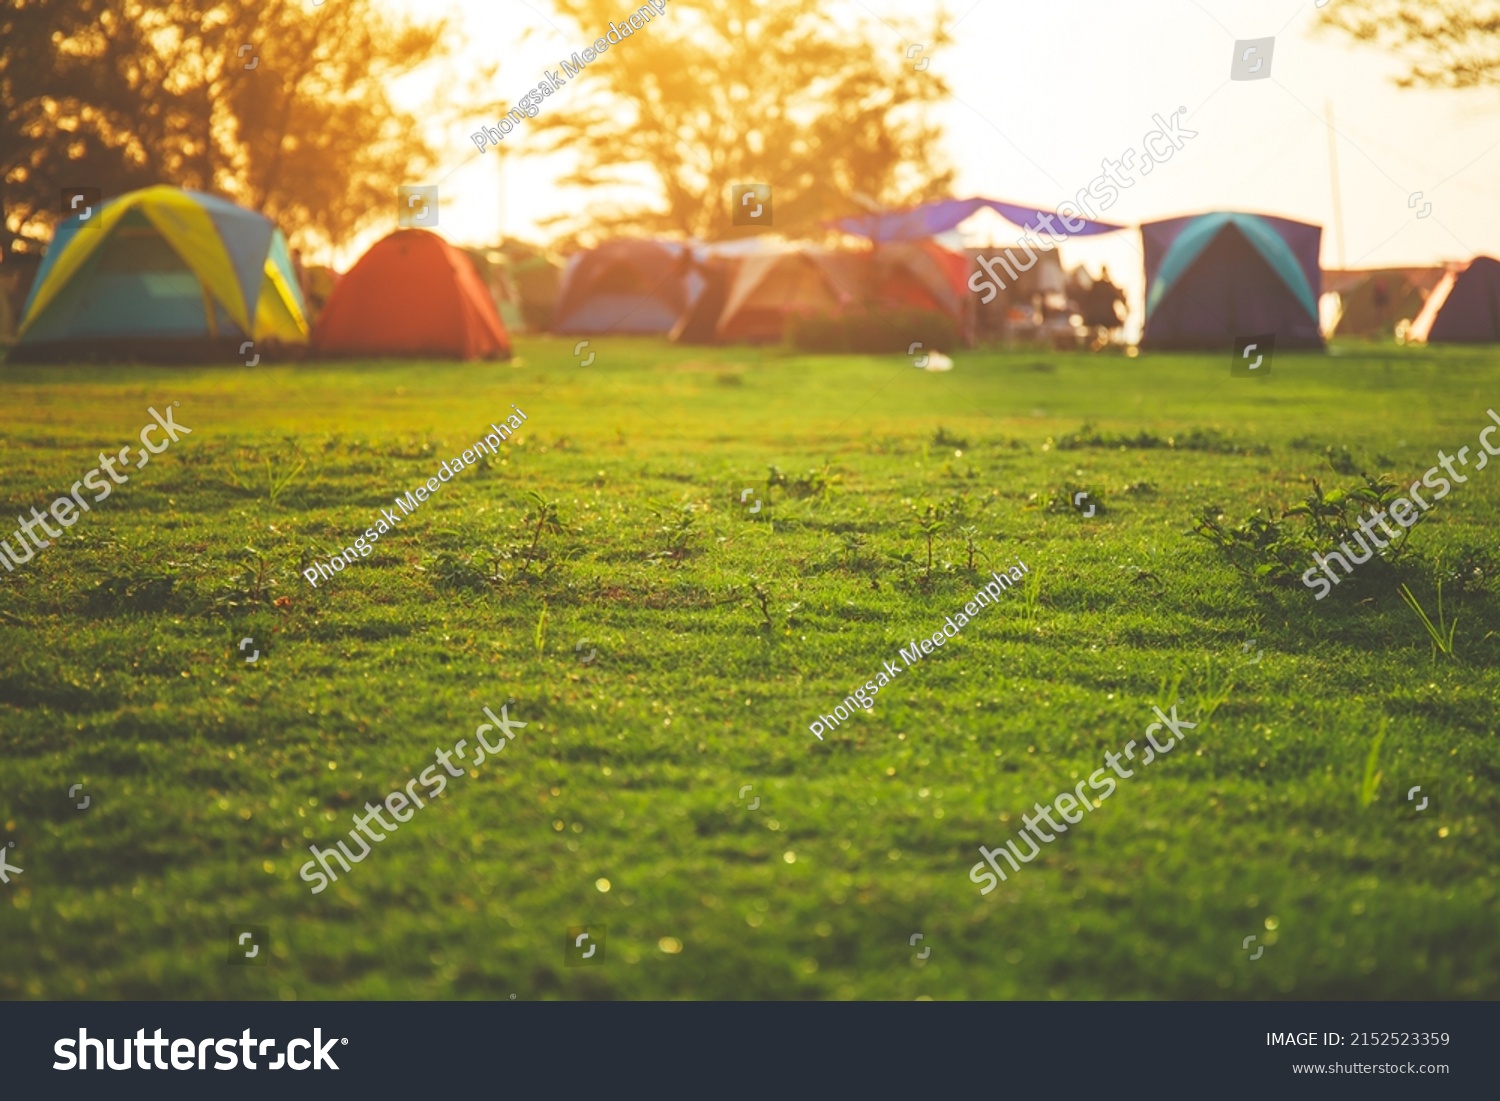 Selective focused on Lawn or green grass ground of camping ground near the sea beach. with camping tent in the background. #2152523359